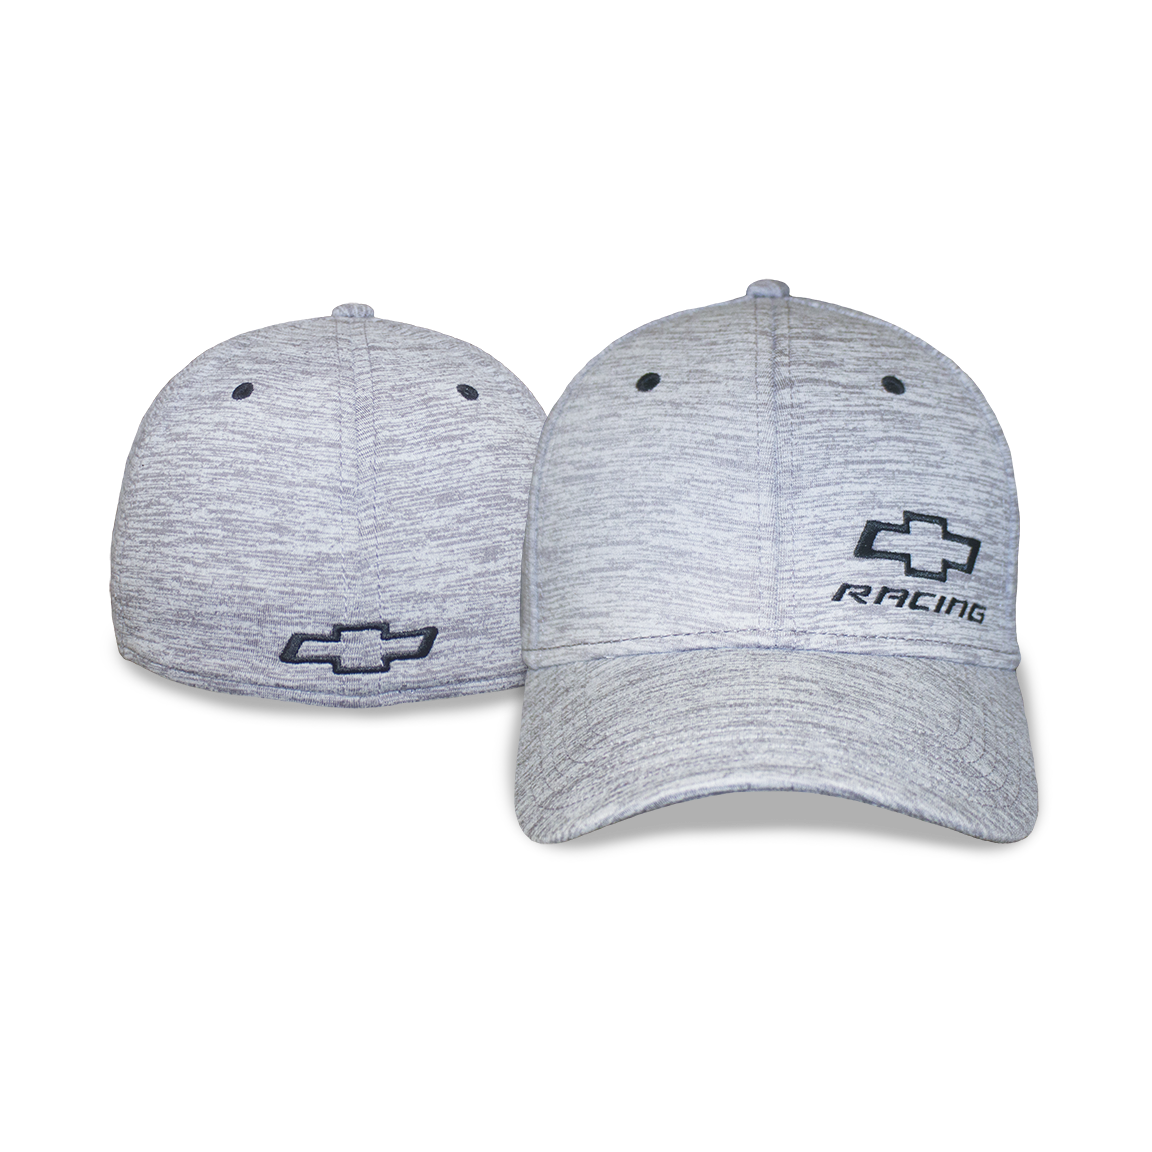 Soft Heather Grey Chevy Racing Fitted Hat